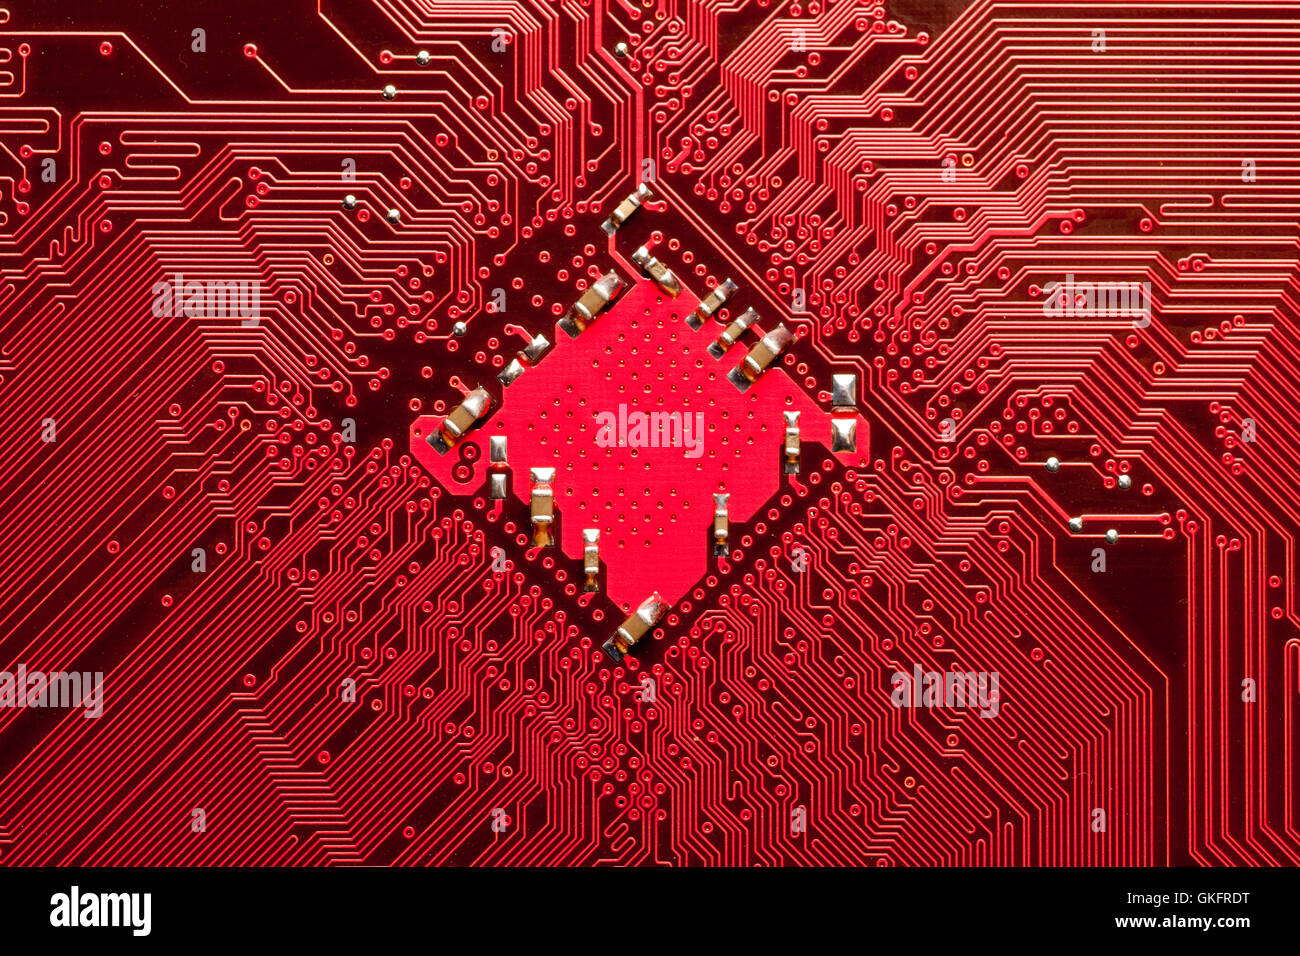 red computer chip pattern